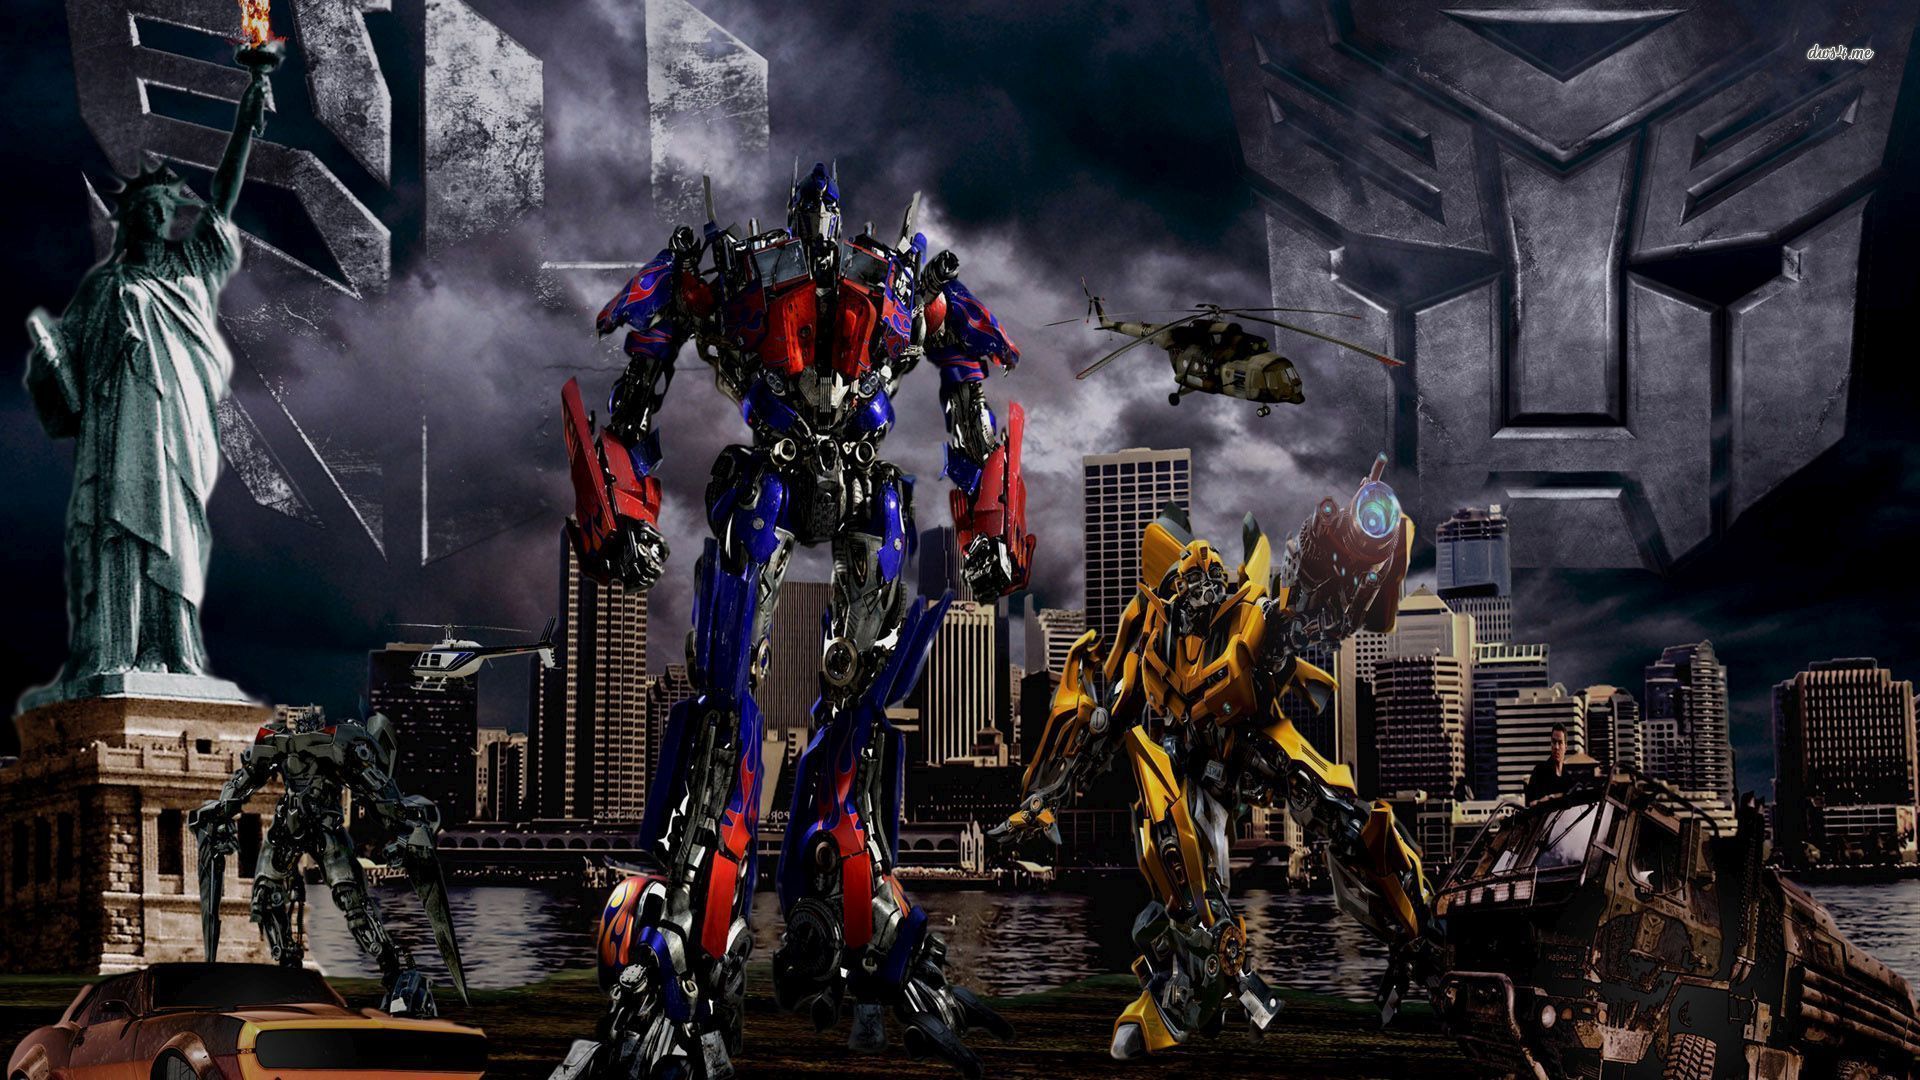 Transformers: Age of Extinction wallpaper - Movie wallpapers - #29176